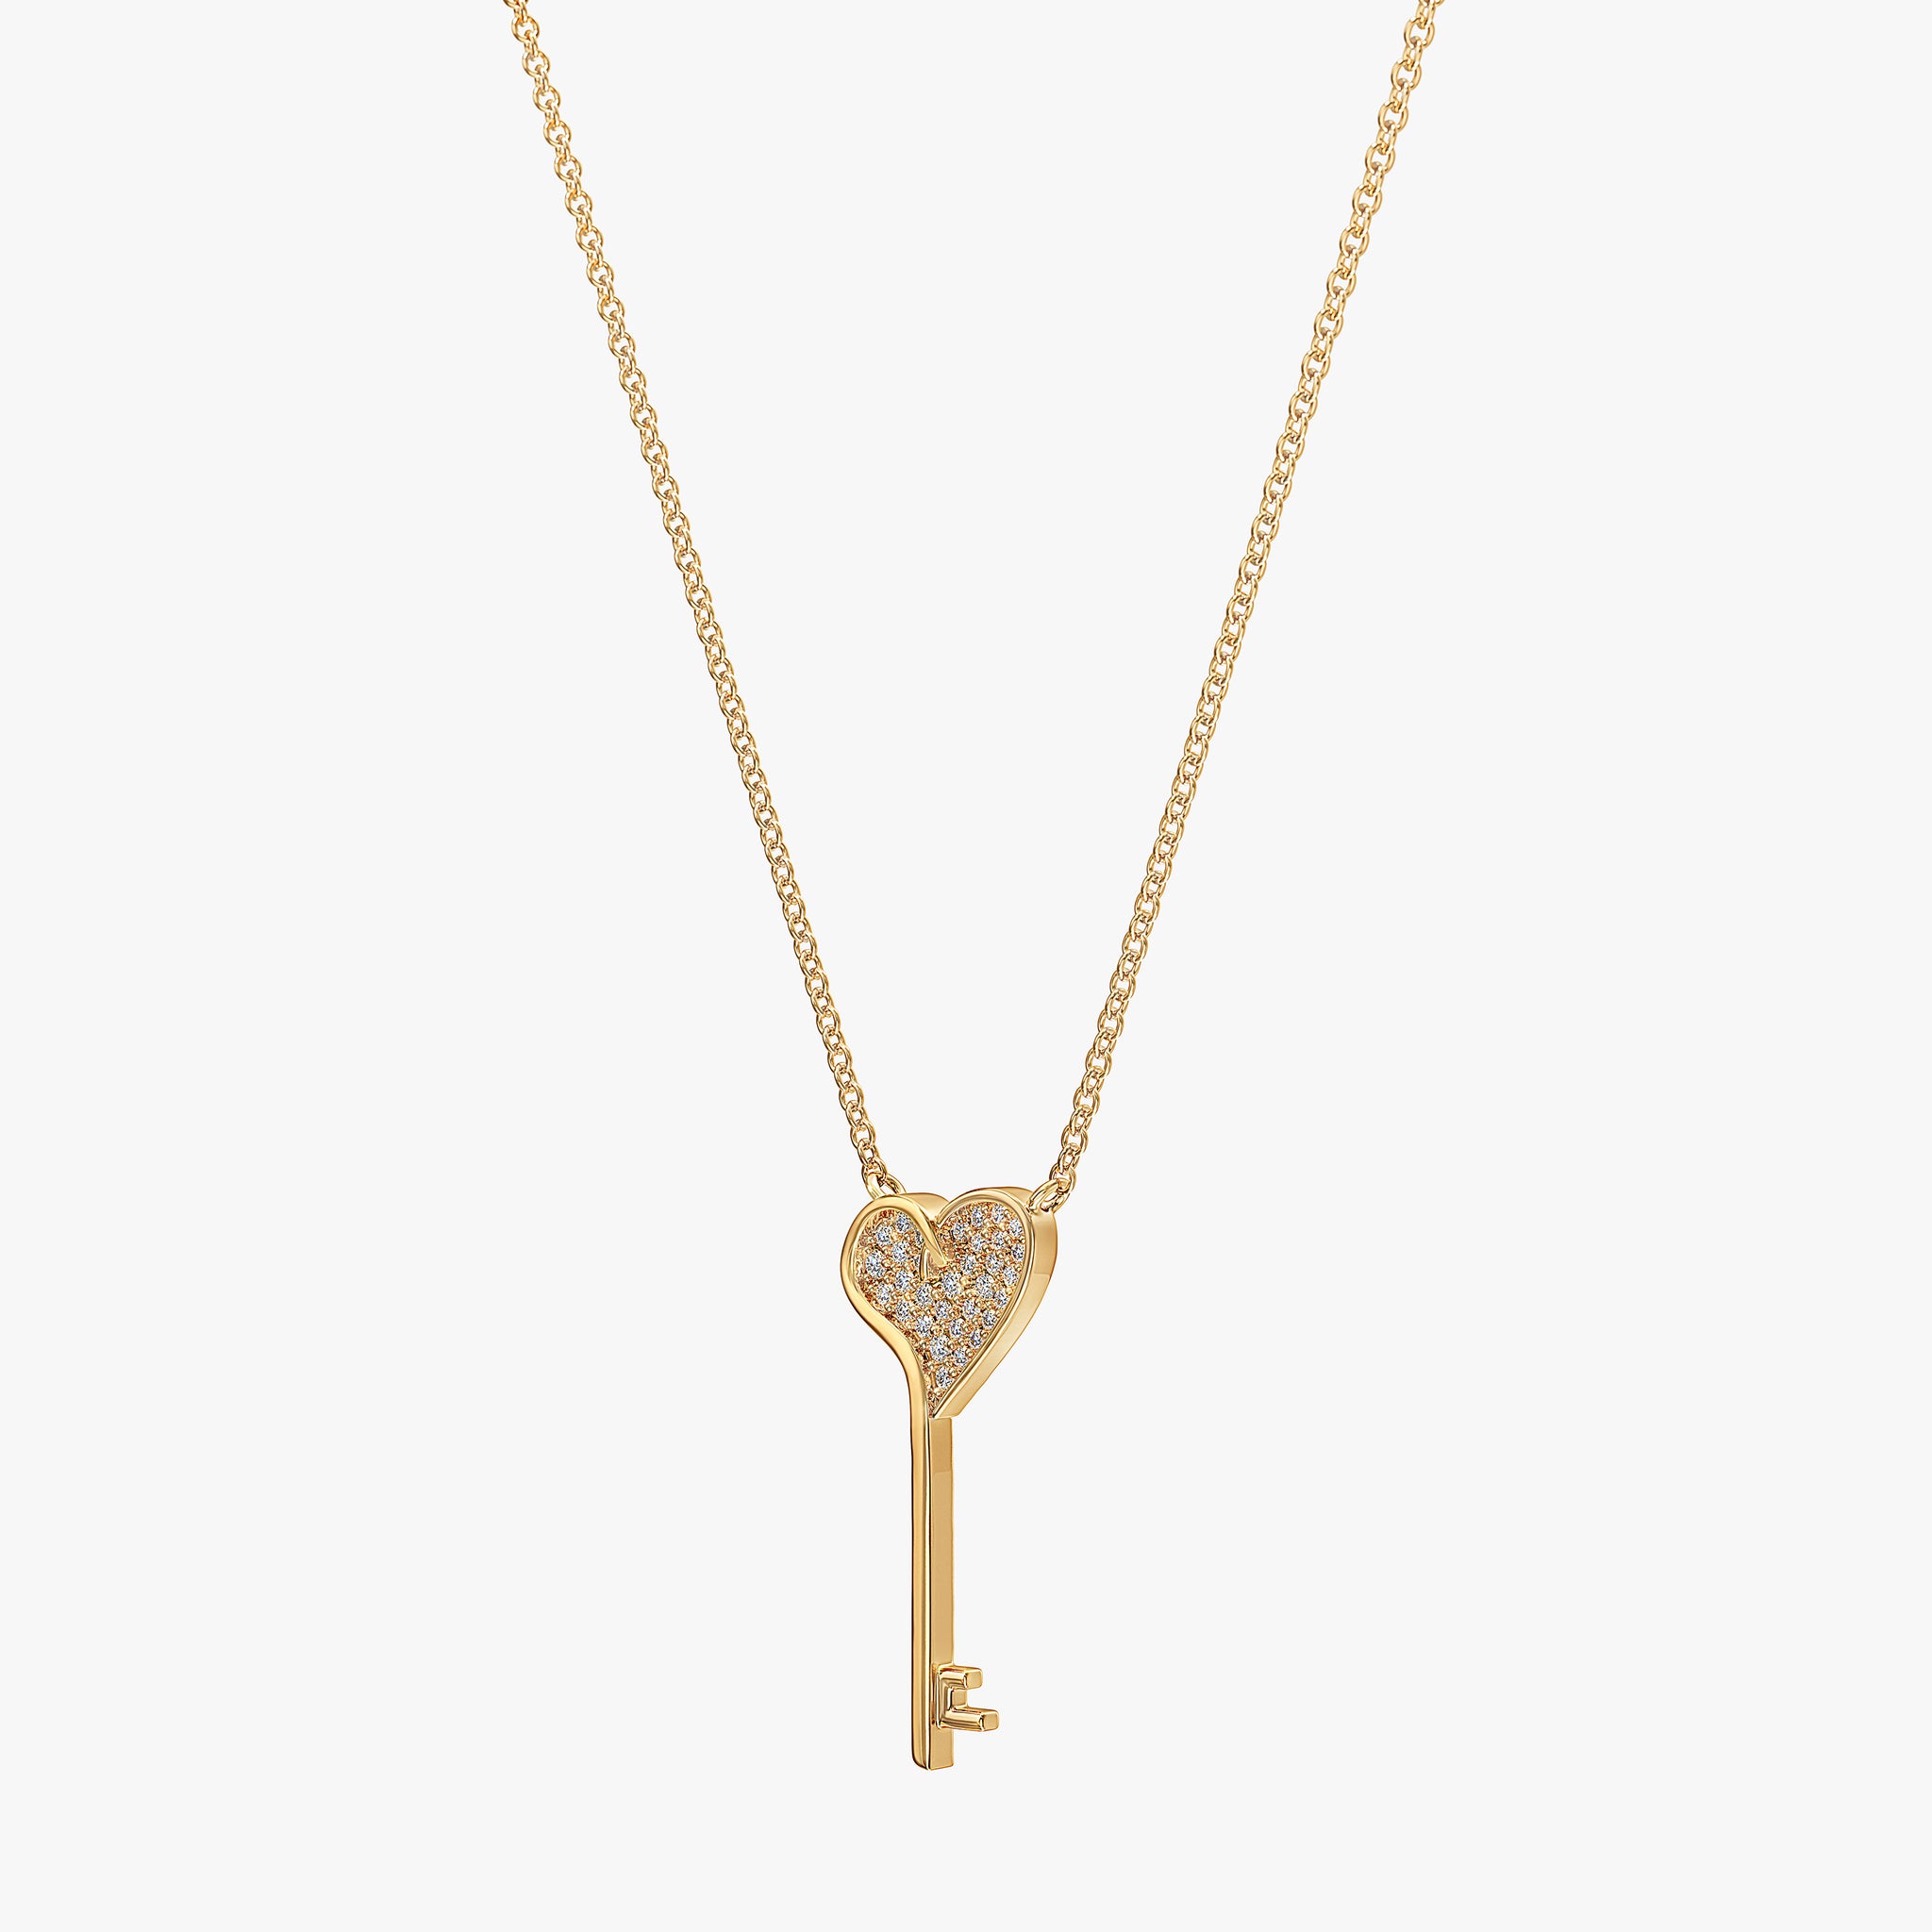 J'EVAR 14KT Yellow Gold Heart Key ALTR Lab Grown Diamond Necklace Perspective View | 0.10 CT